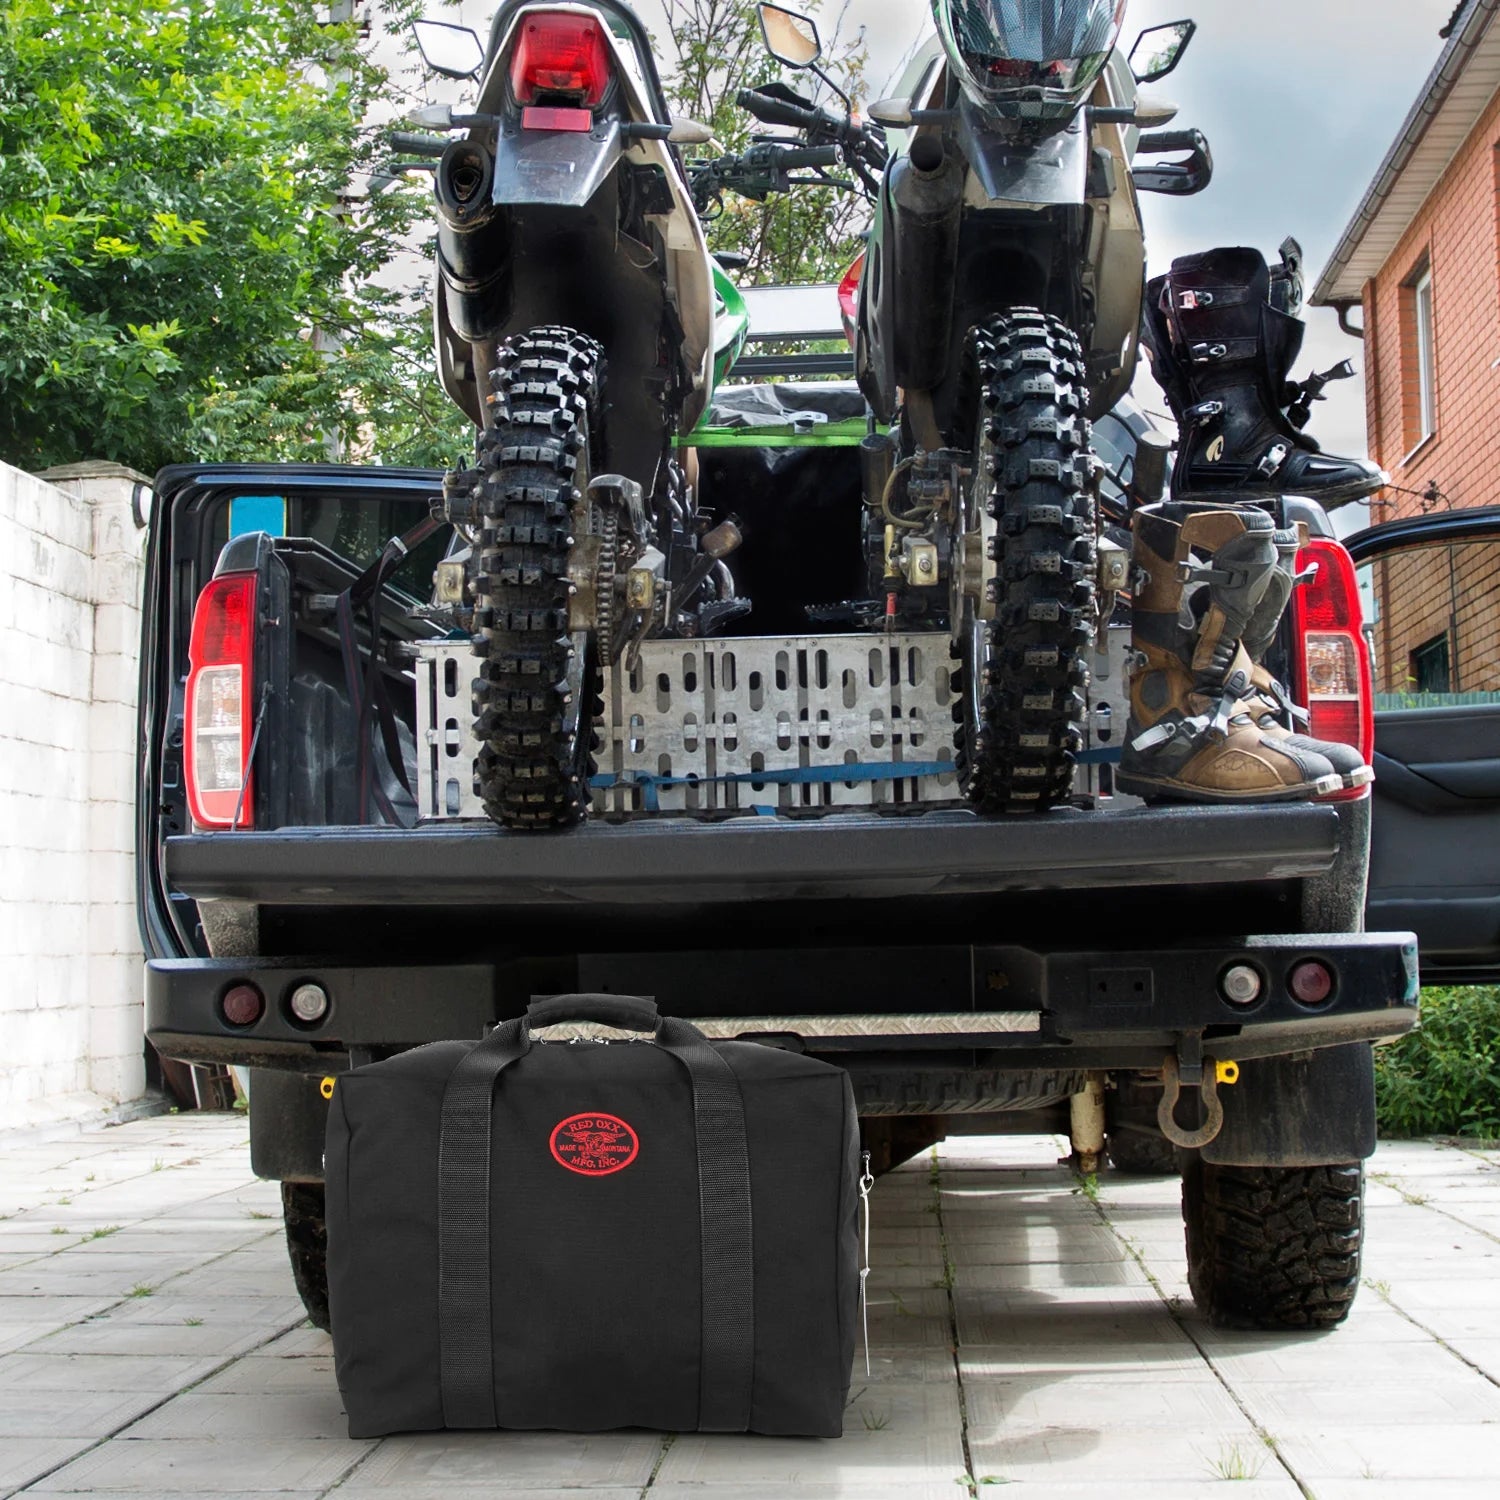 Small Aviator kit bag with truck and bikes.